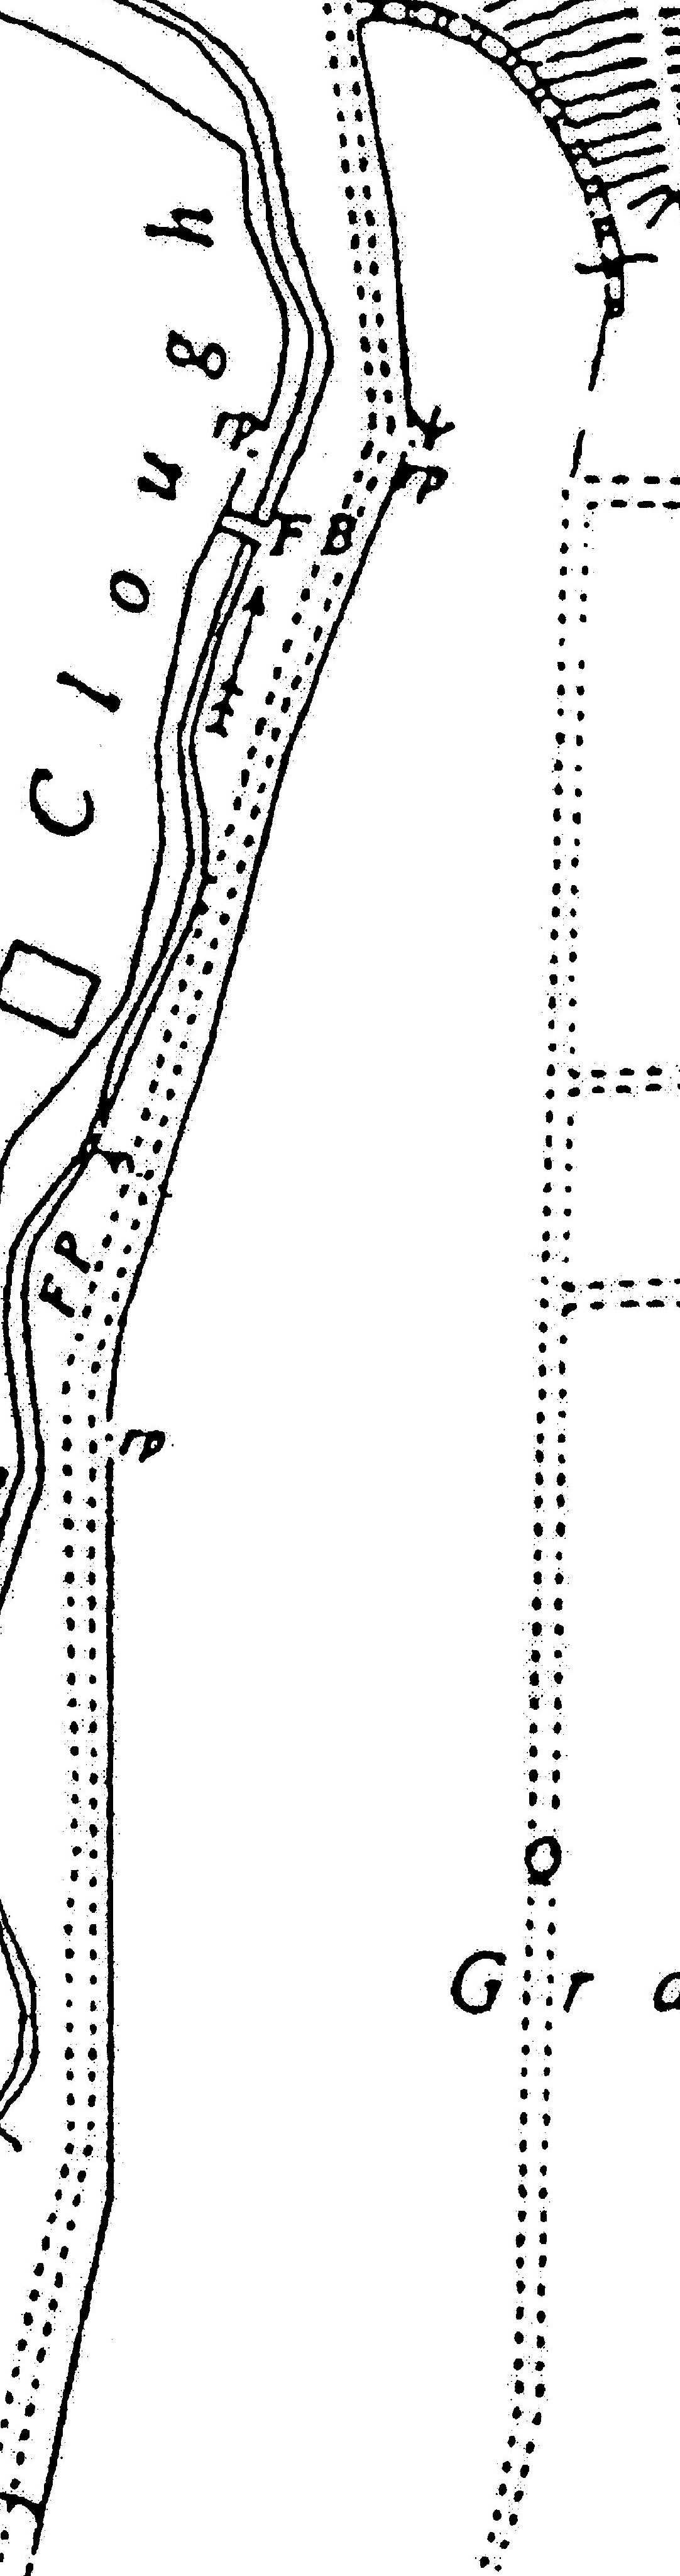 Section EE